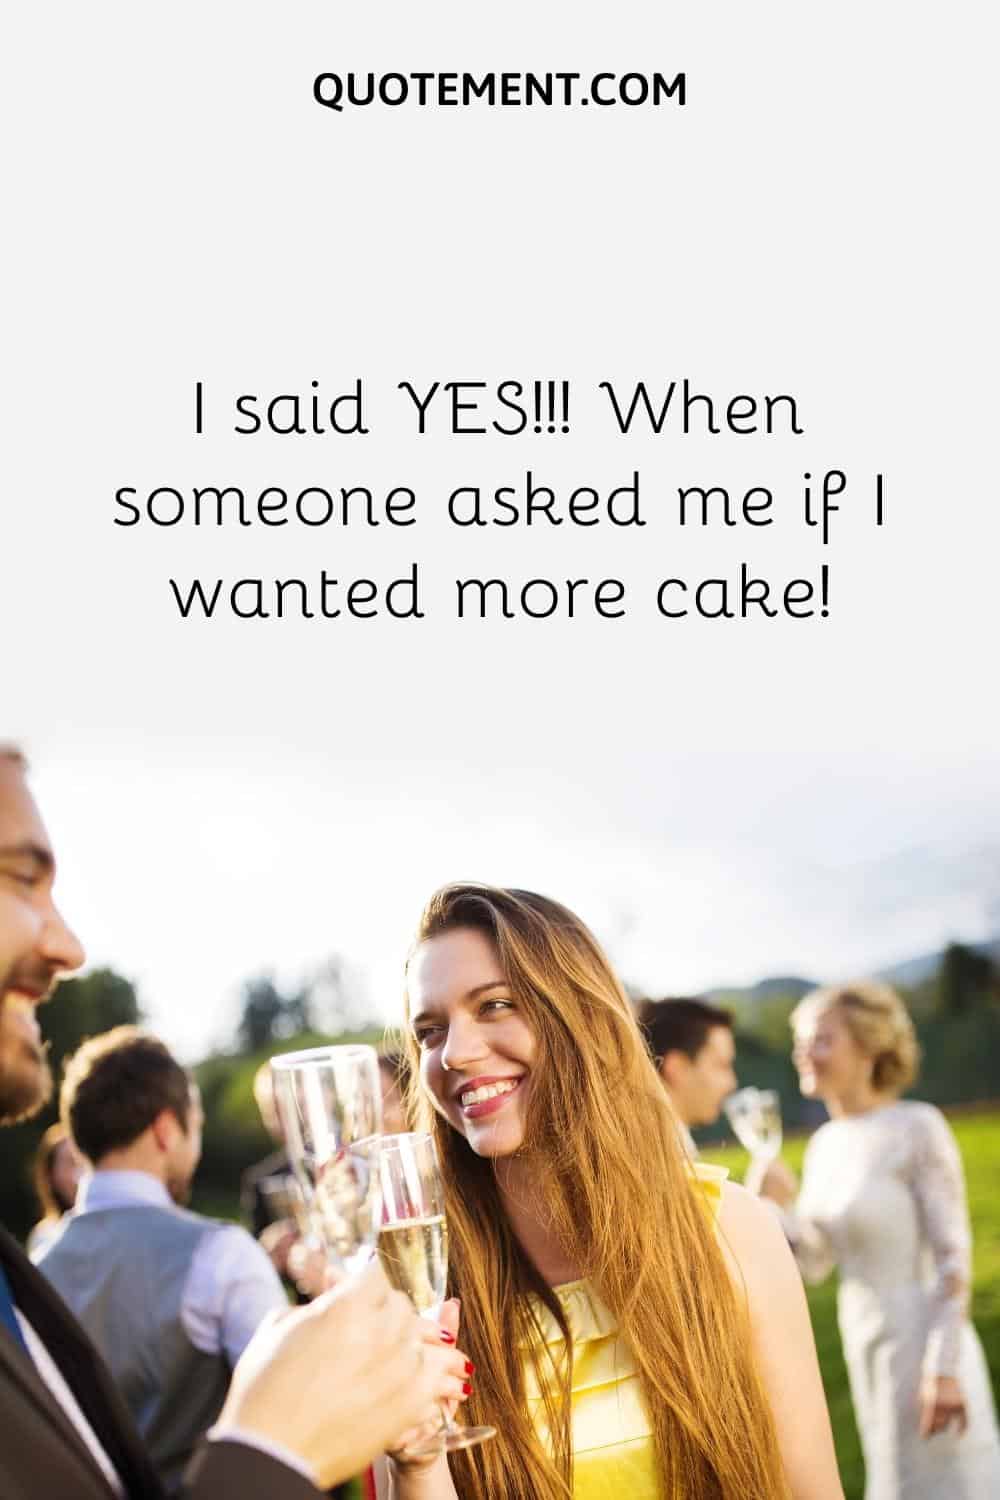 I said YES!!! When someone asked me if I wanted more cake!